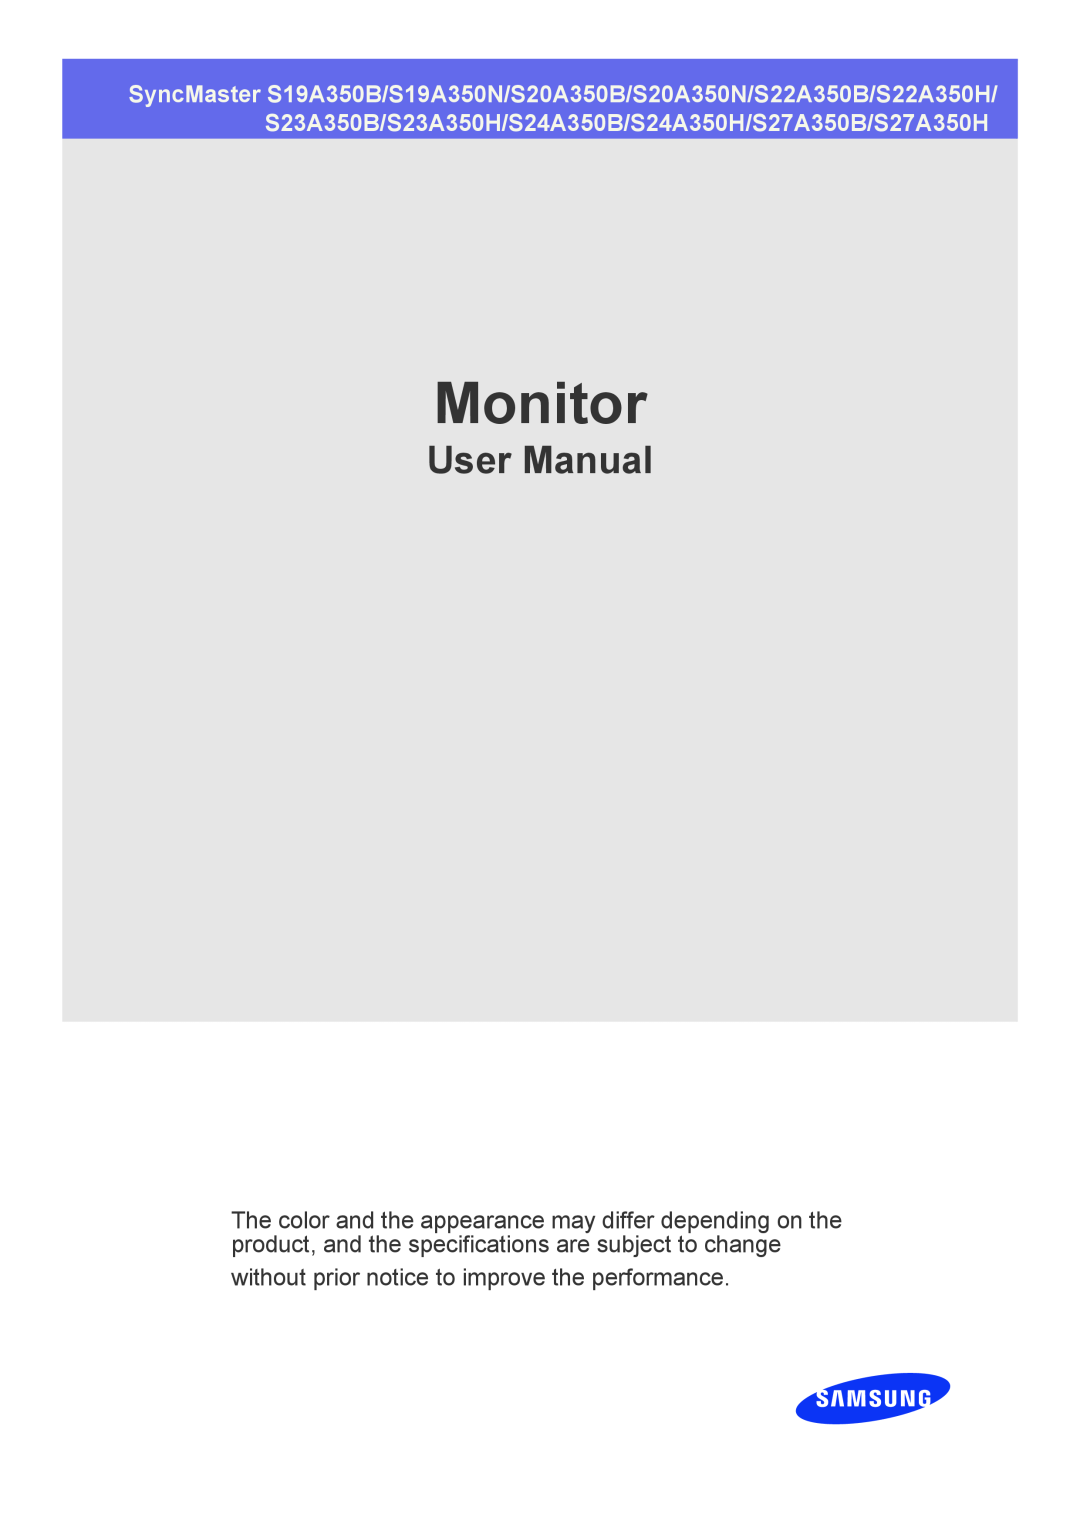 Samsung S24A350B, S27A350H, S20A350B user manual Monitor, User Manual, without prior notice to improve the performance 